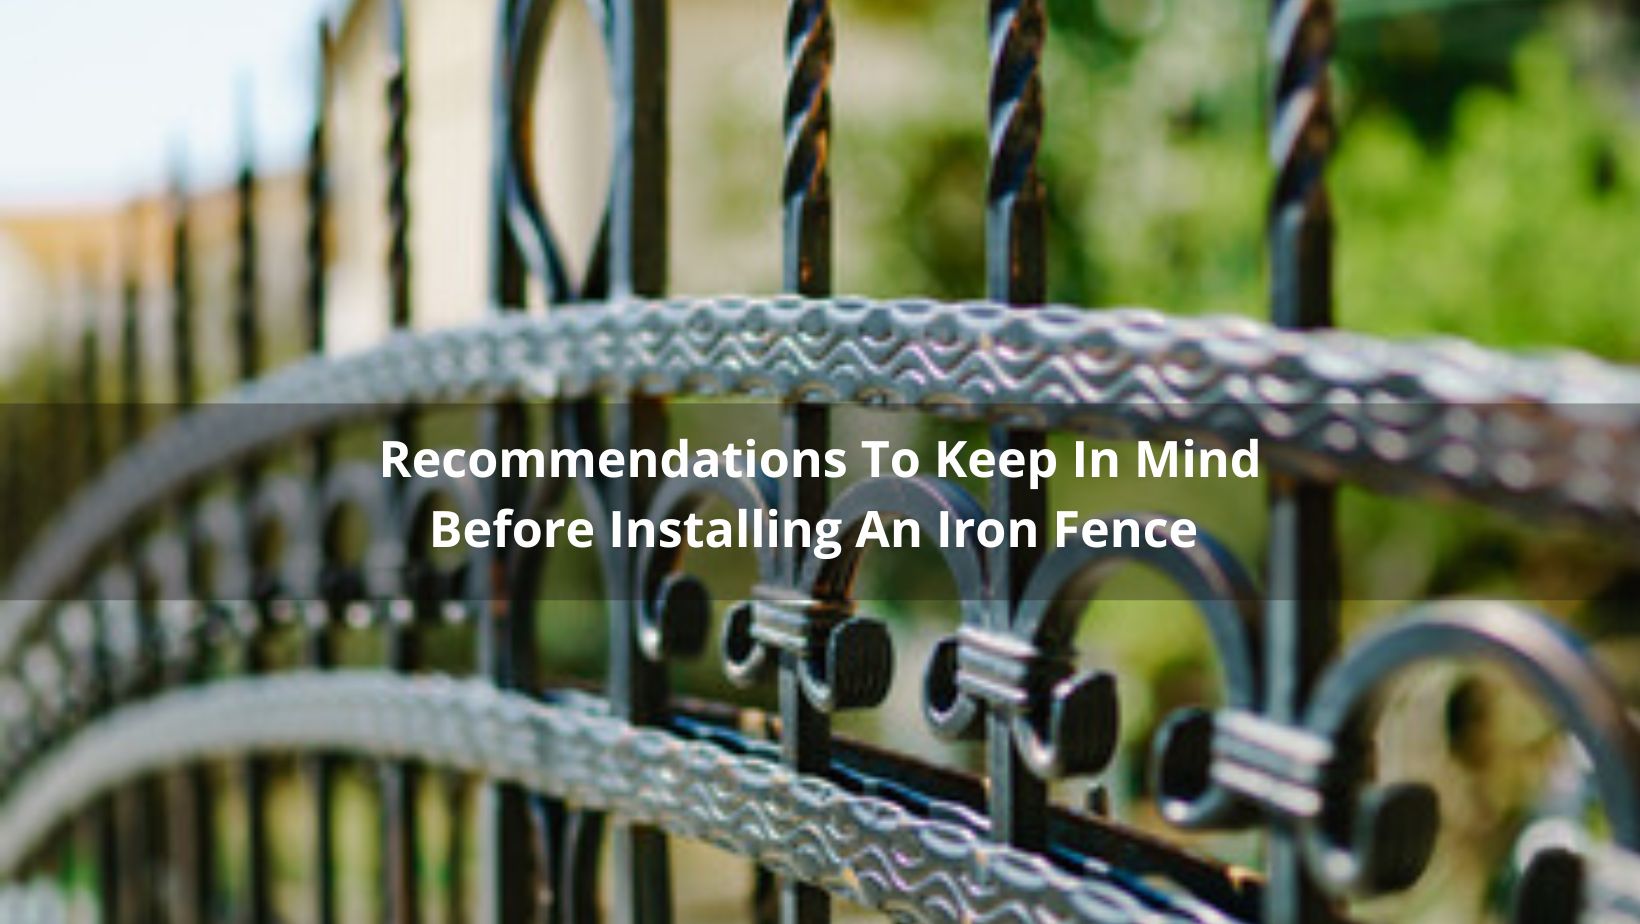 recommendations-to-keep-in-mind-before-installing-an-iron-fence